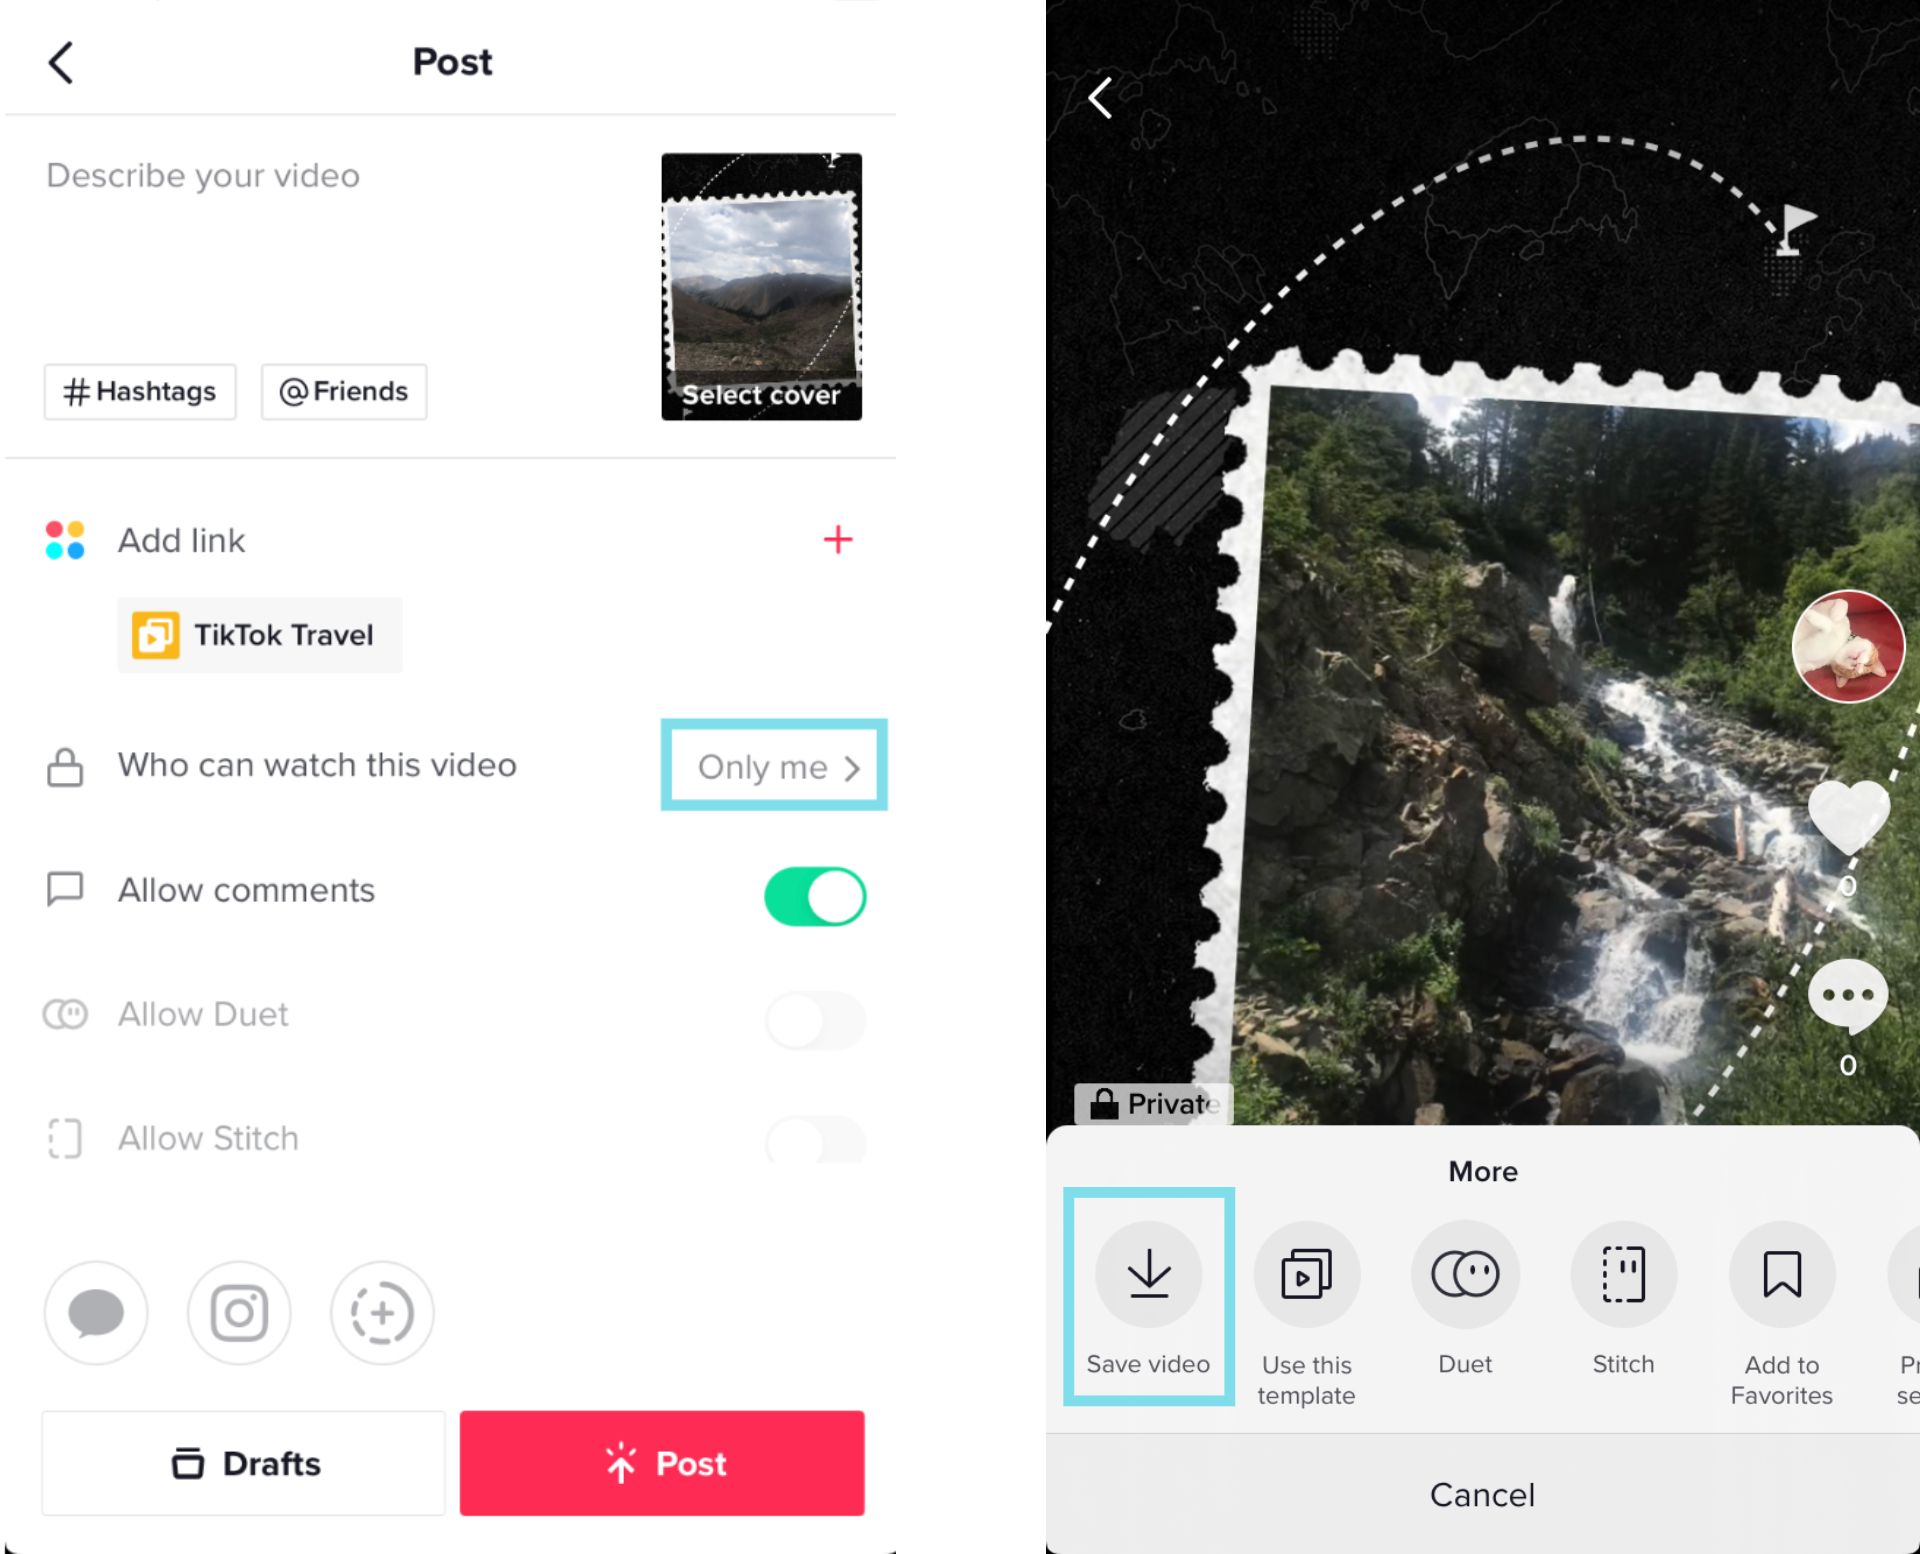 Screenshots showing how to post a video privately on TikTok and save it to your phone. 